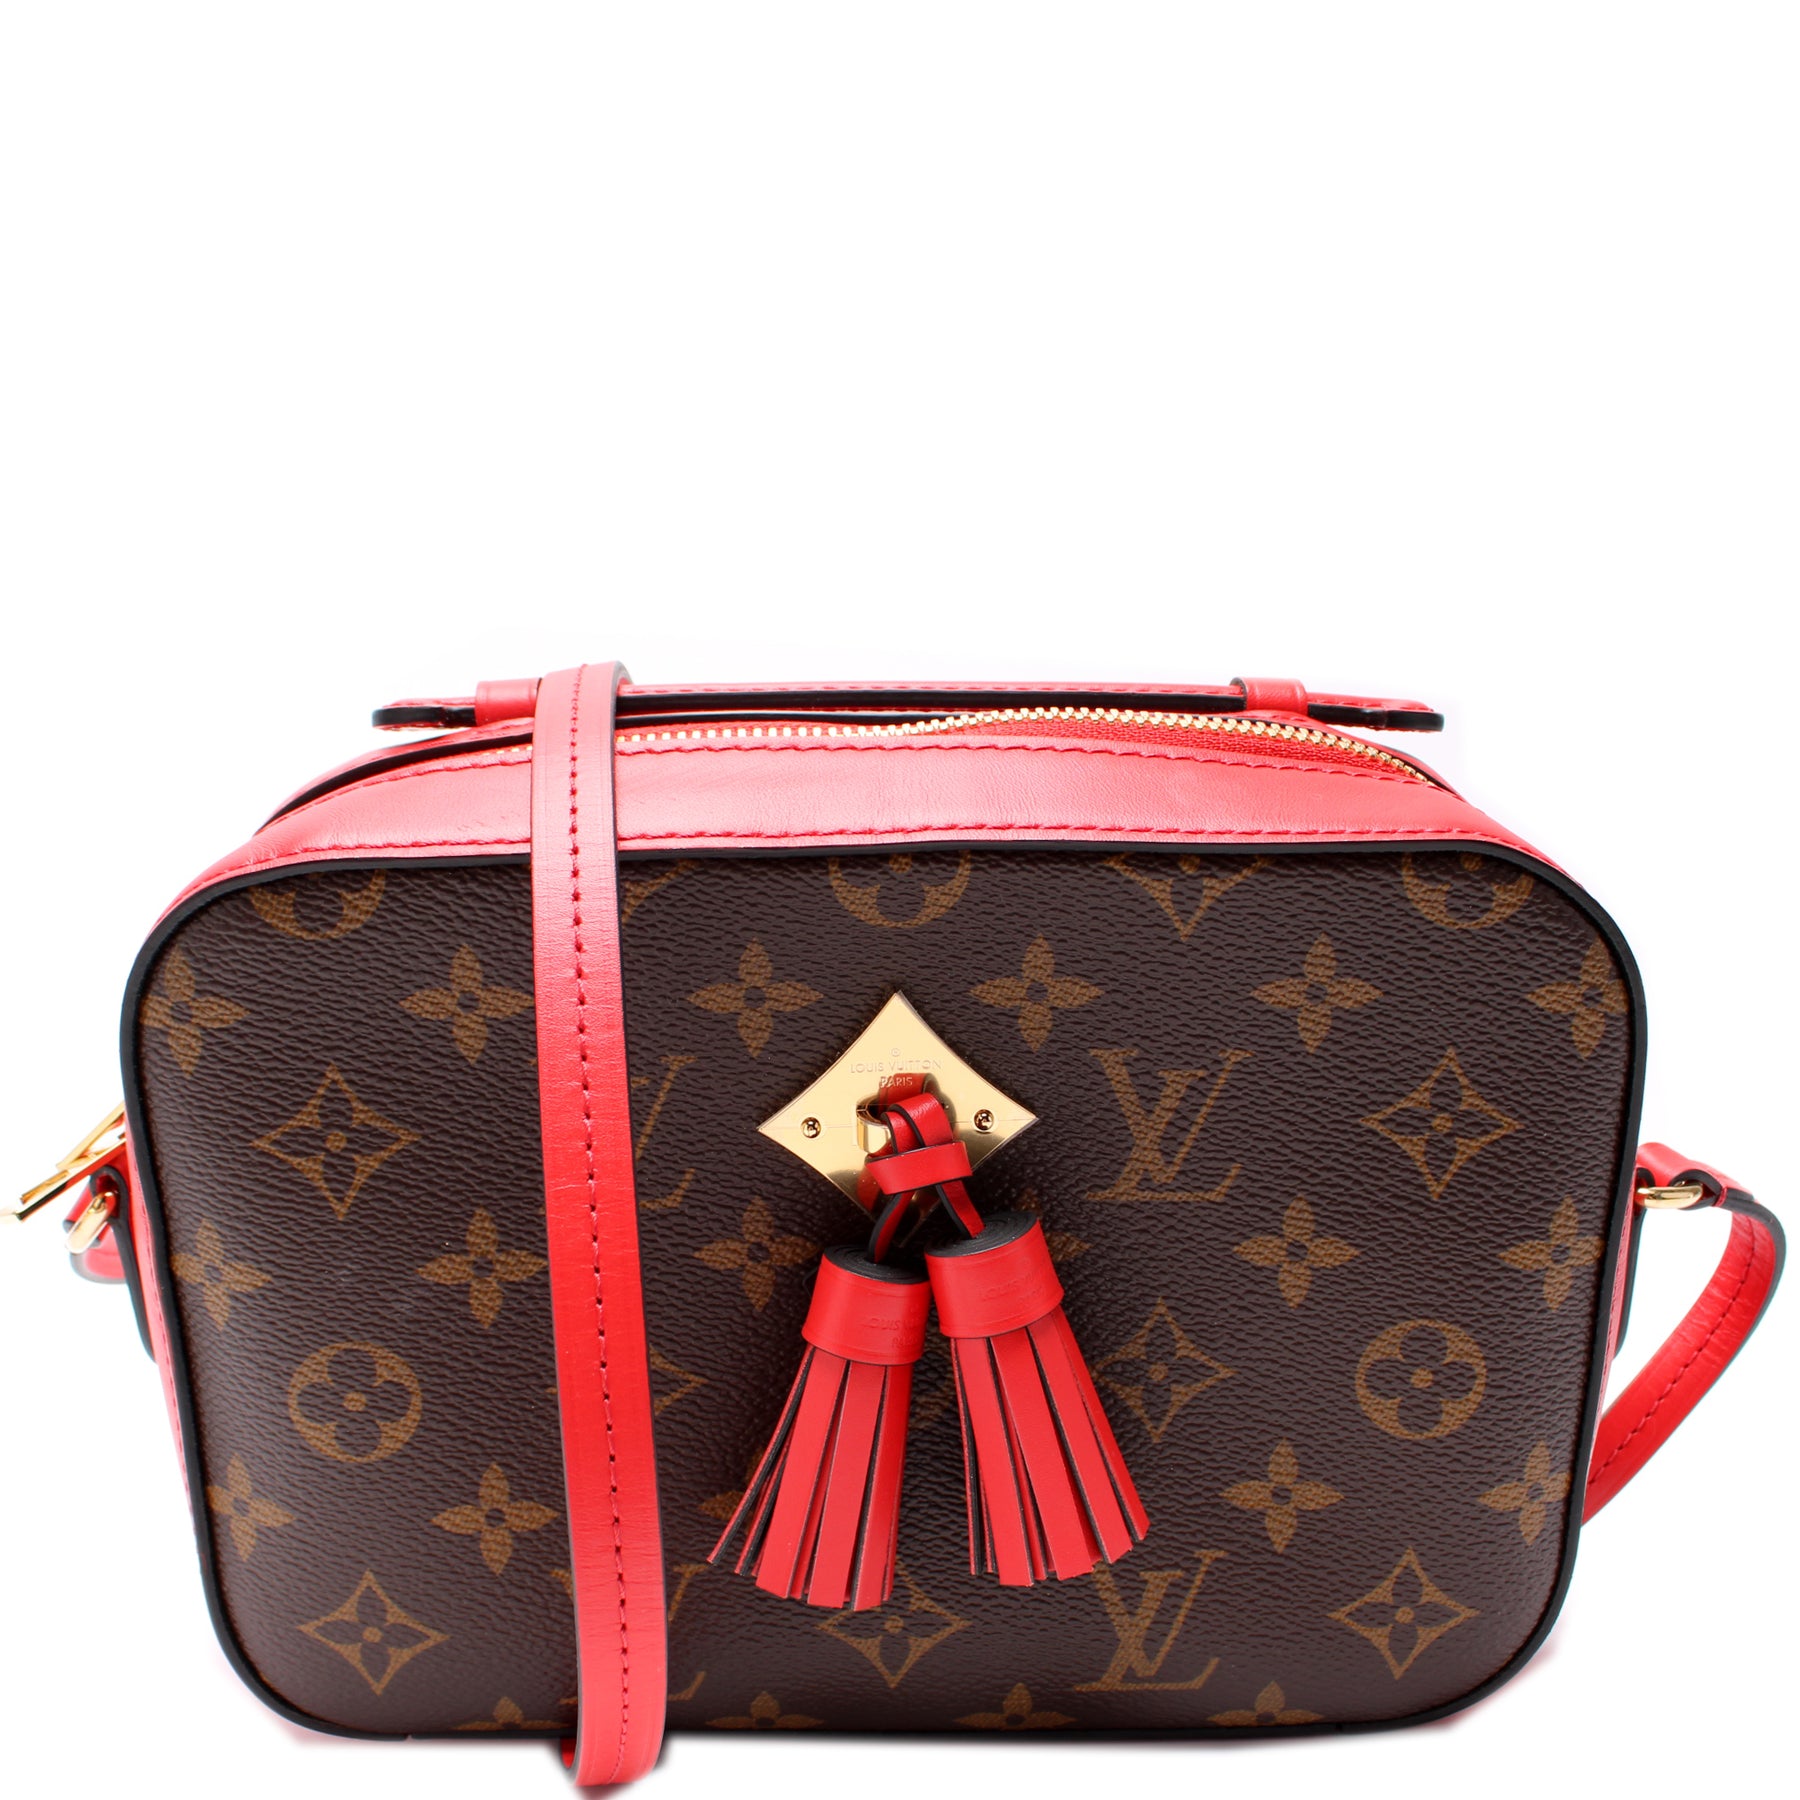 Saintonge leather crossbody bag Louis Vuitton Red in Leather